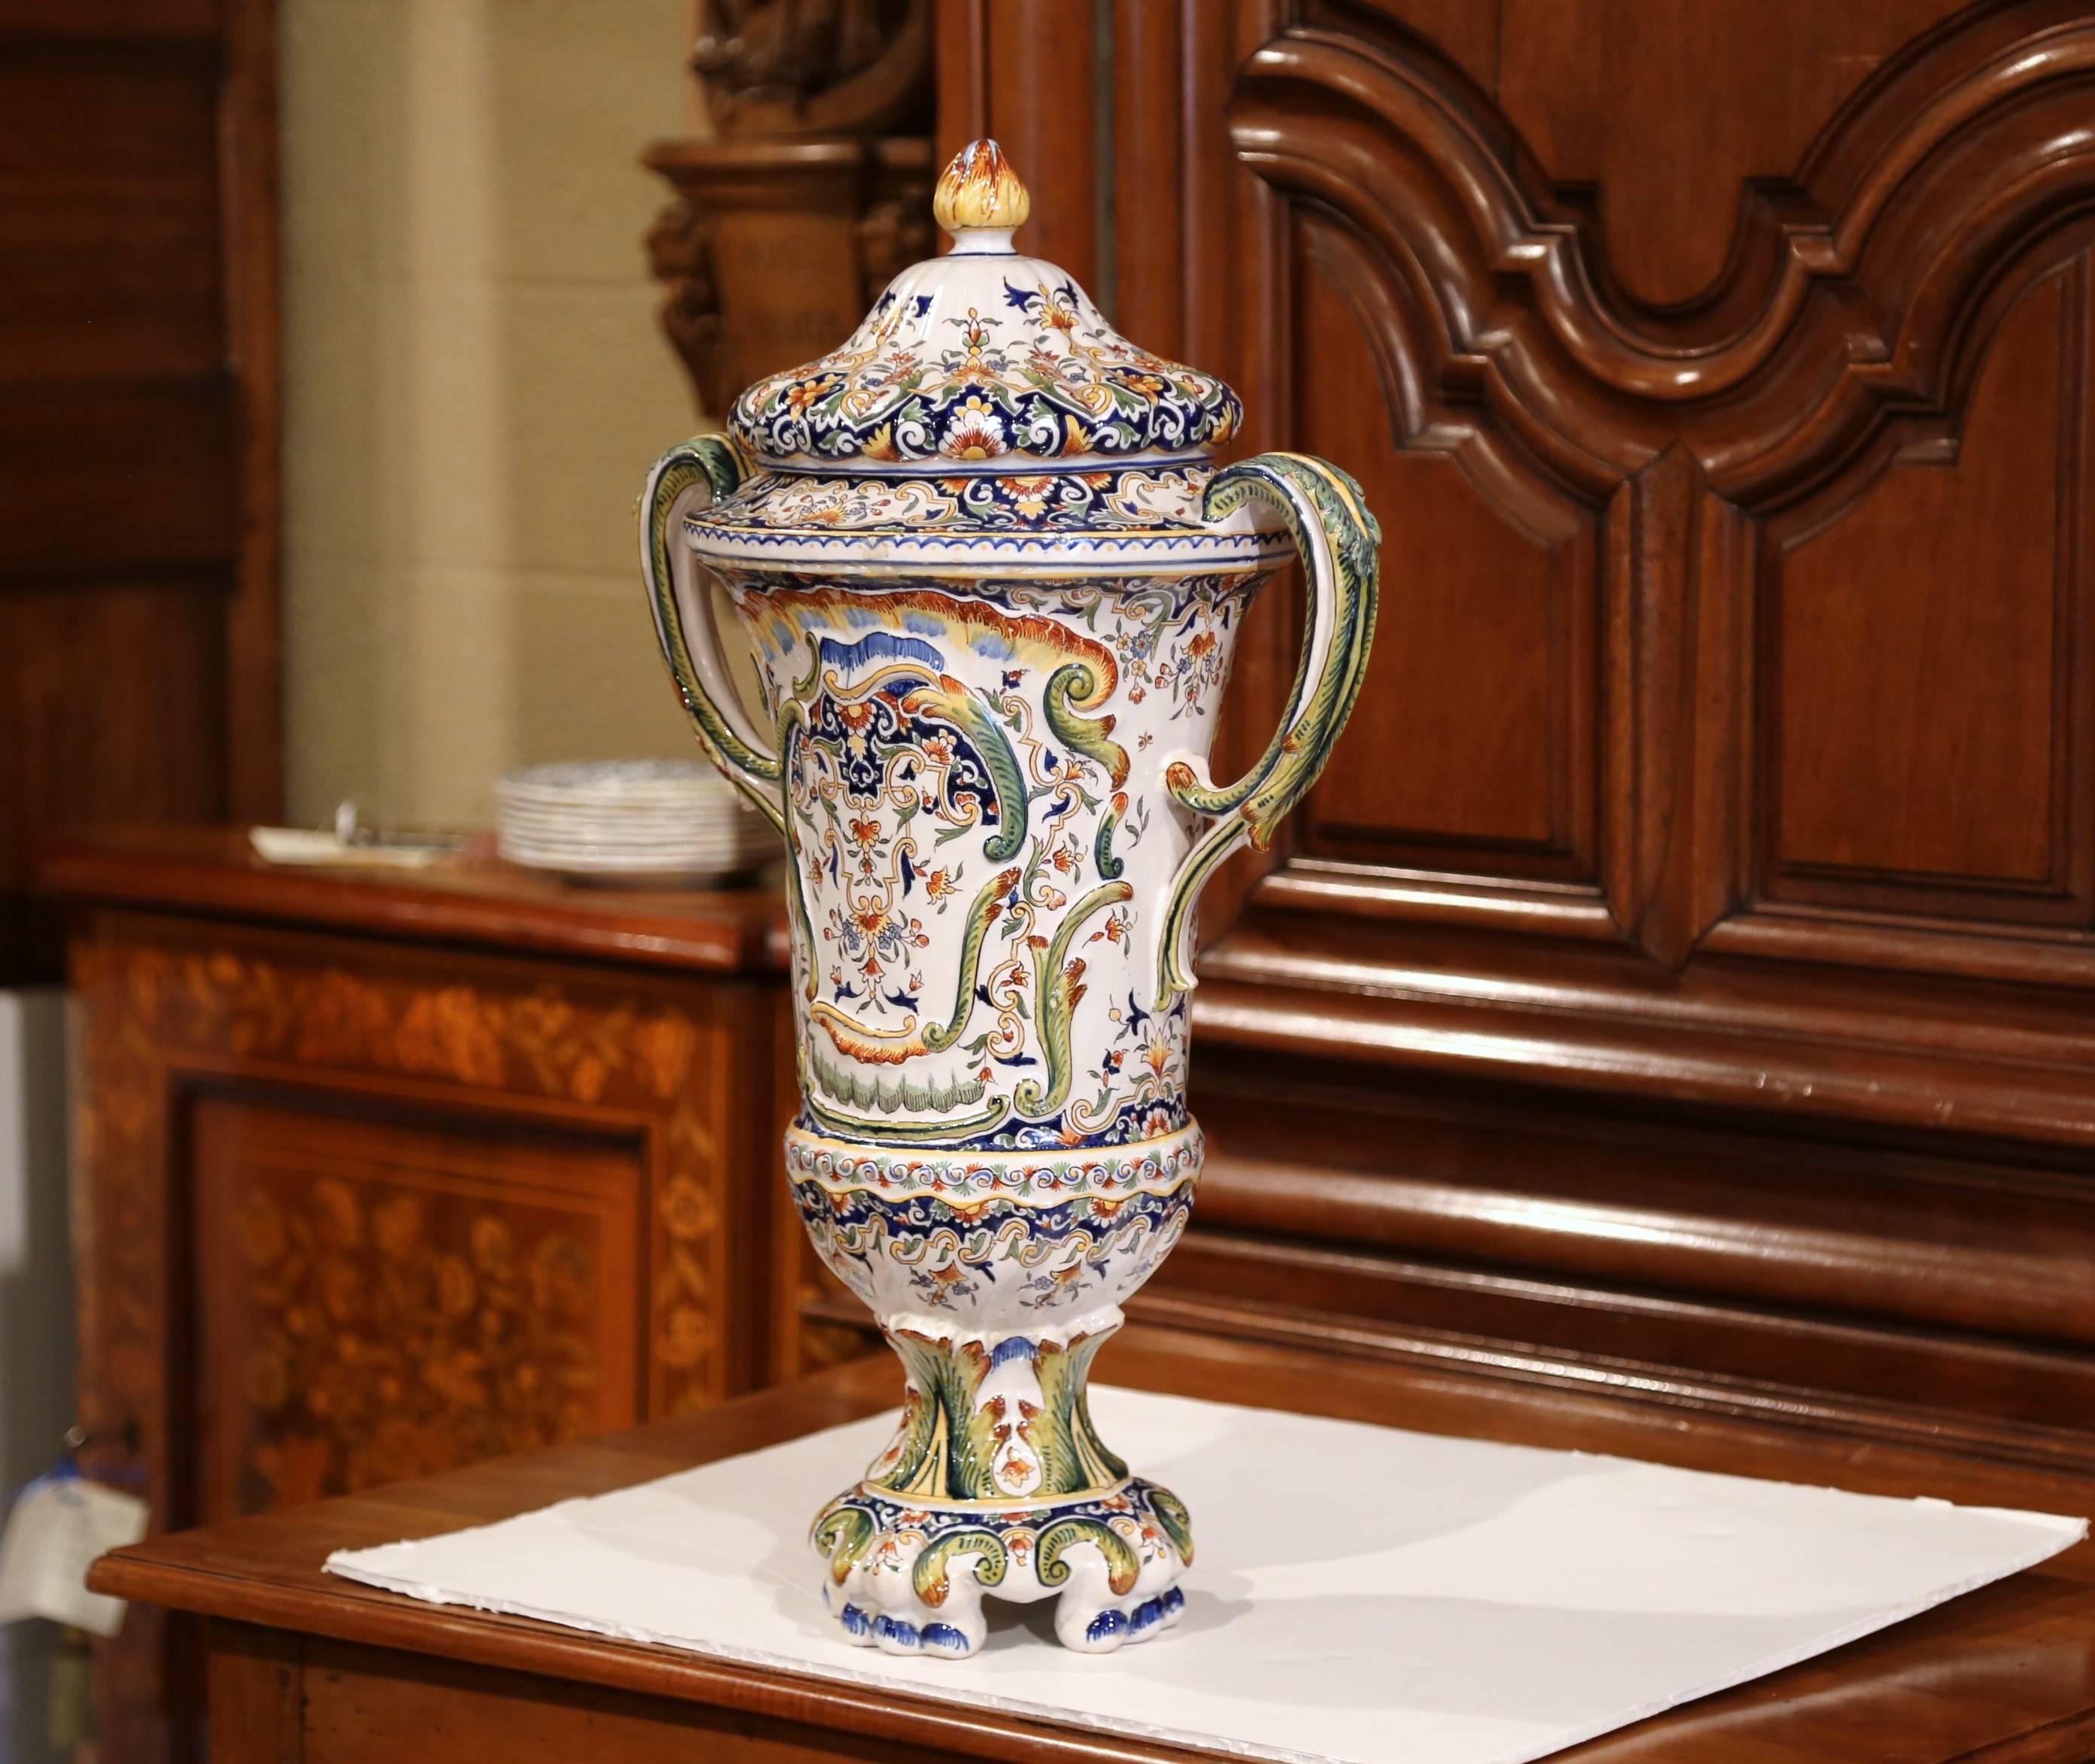 This elegant antique vase was created in Rouen, France circa 1850; the colorful, ceramic vessel stands on small scrolled feet, and features a cone lid with finial at the pediment, embellished with two curved handles with painted leaf motifs in